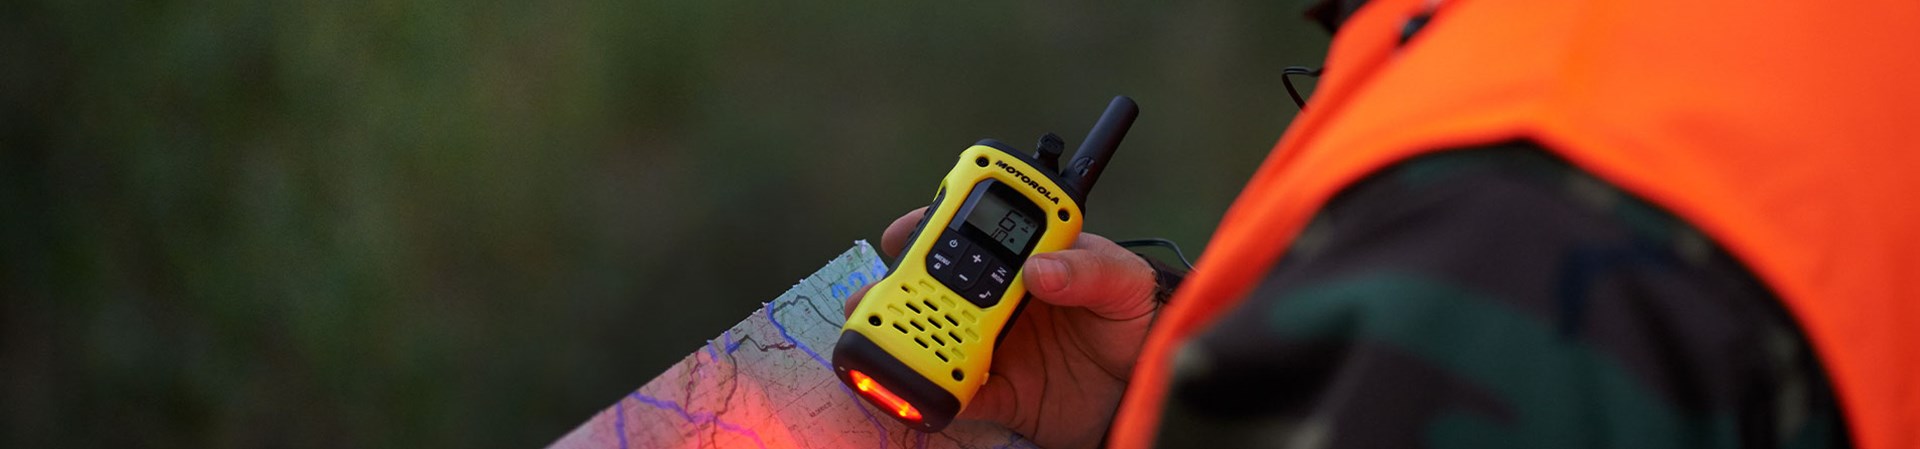 Man Holding A Two Way Radio In The Woods